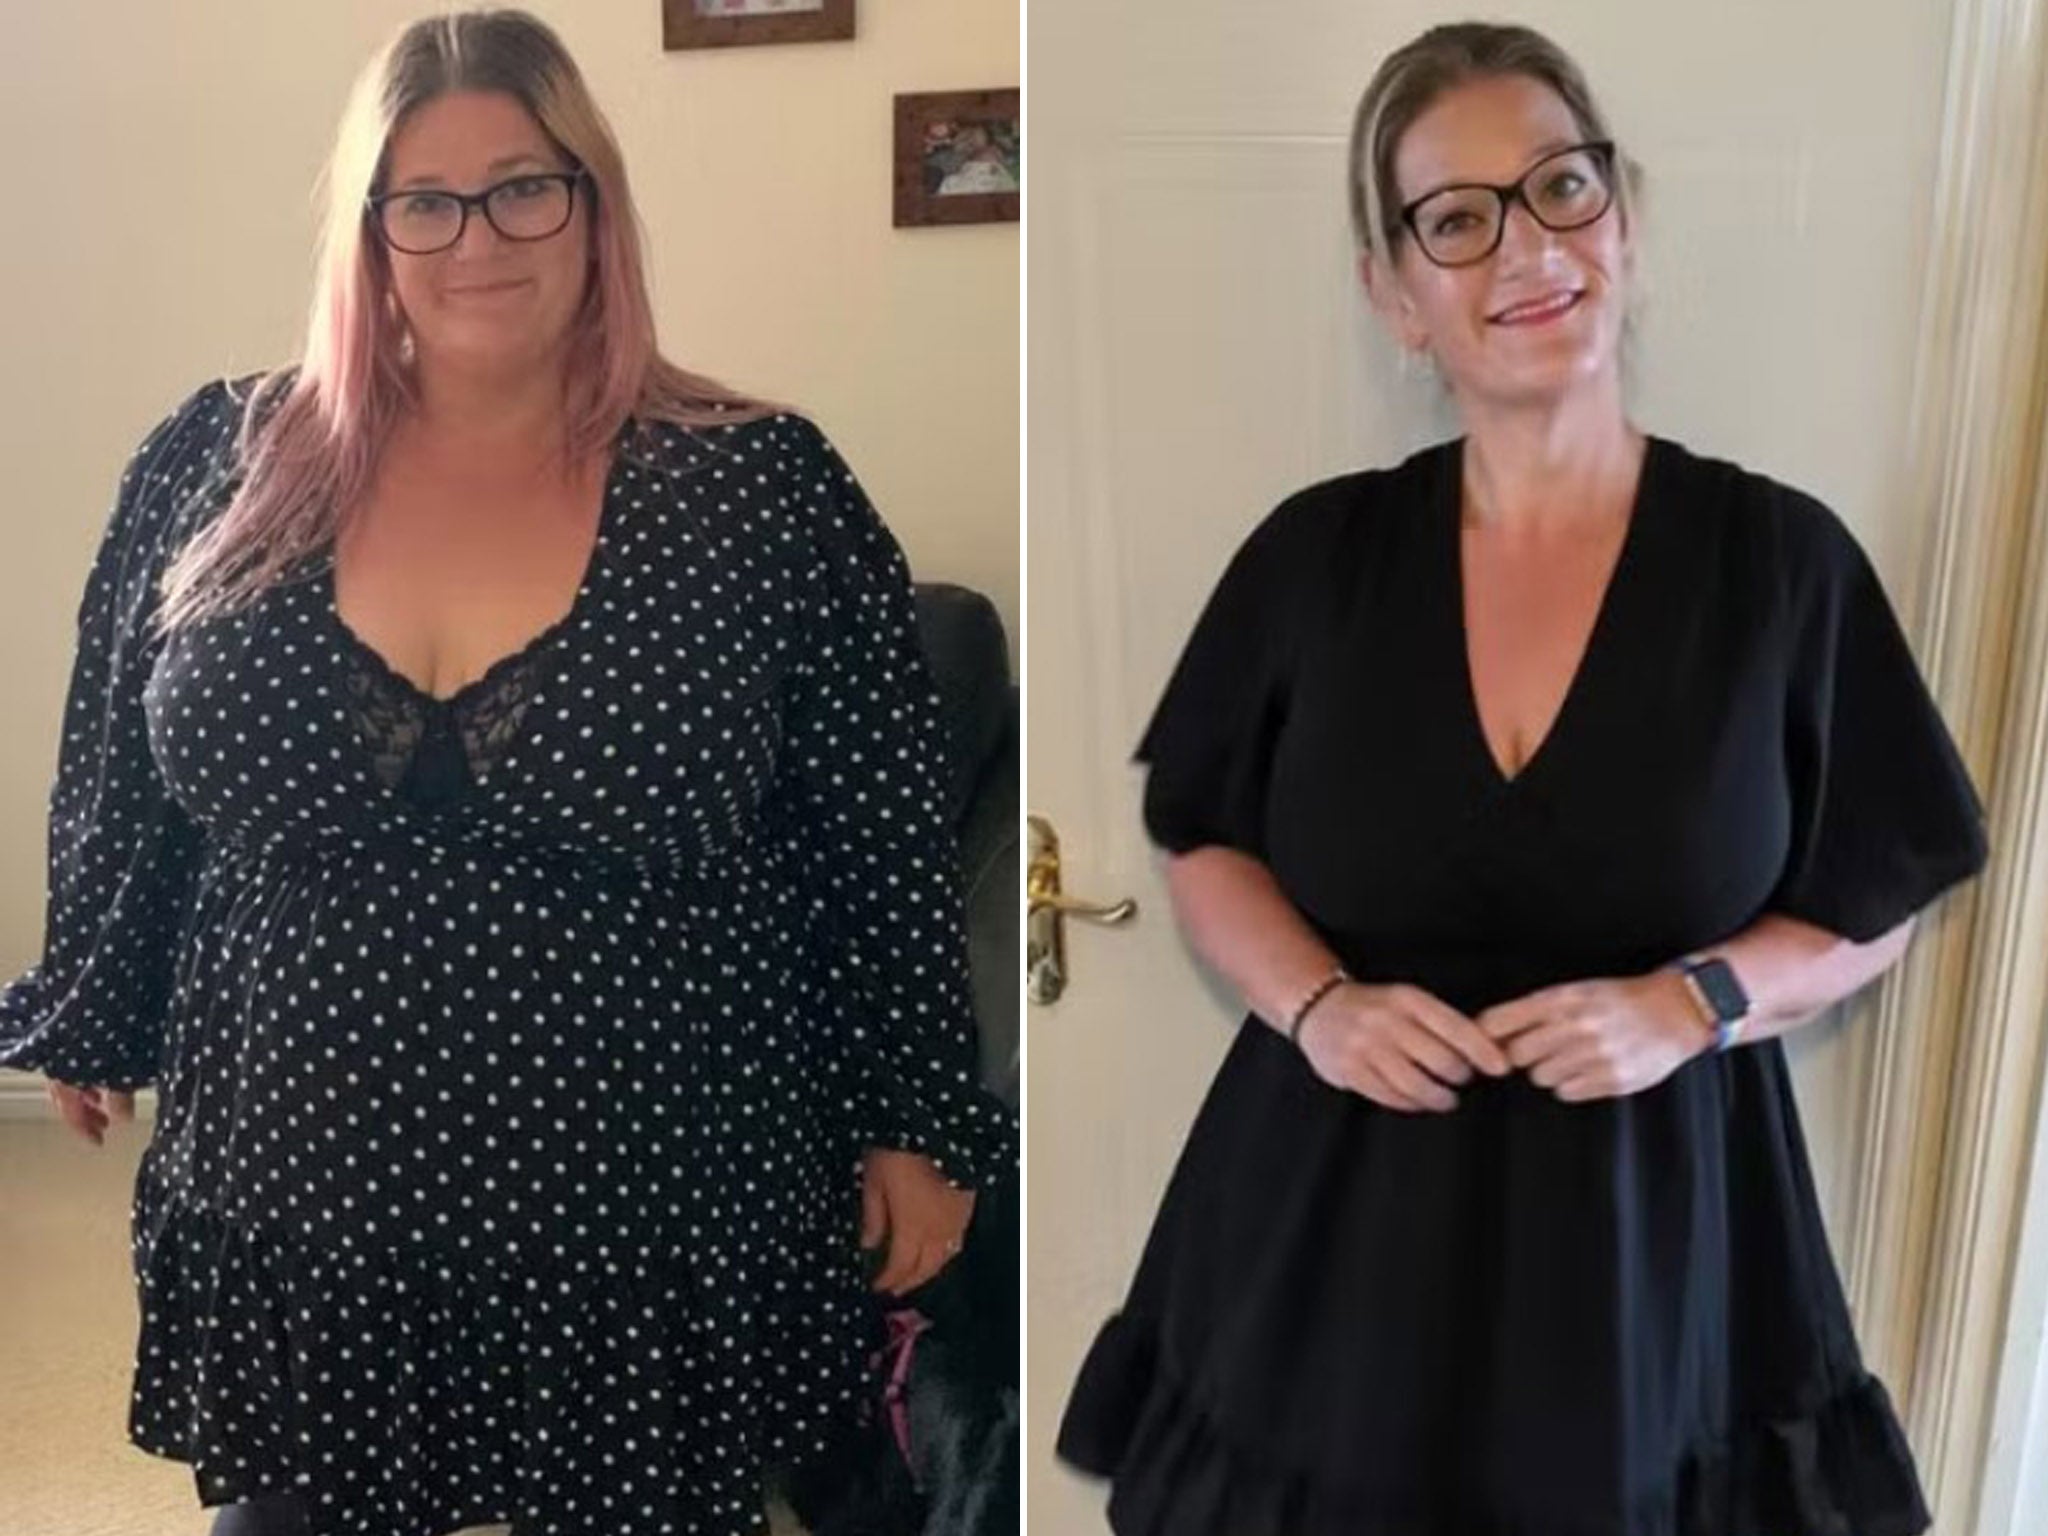 I had bariatric surgery and it changed my life